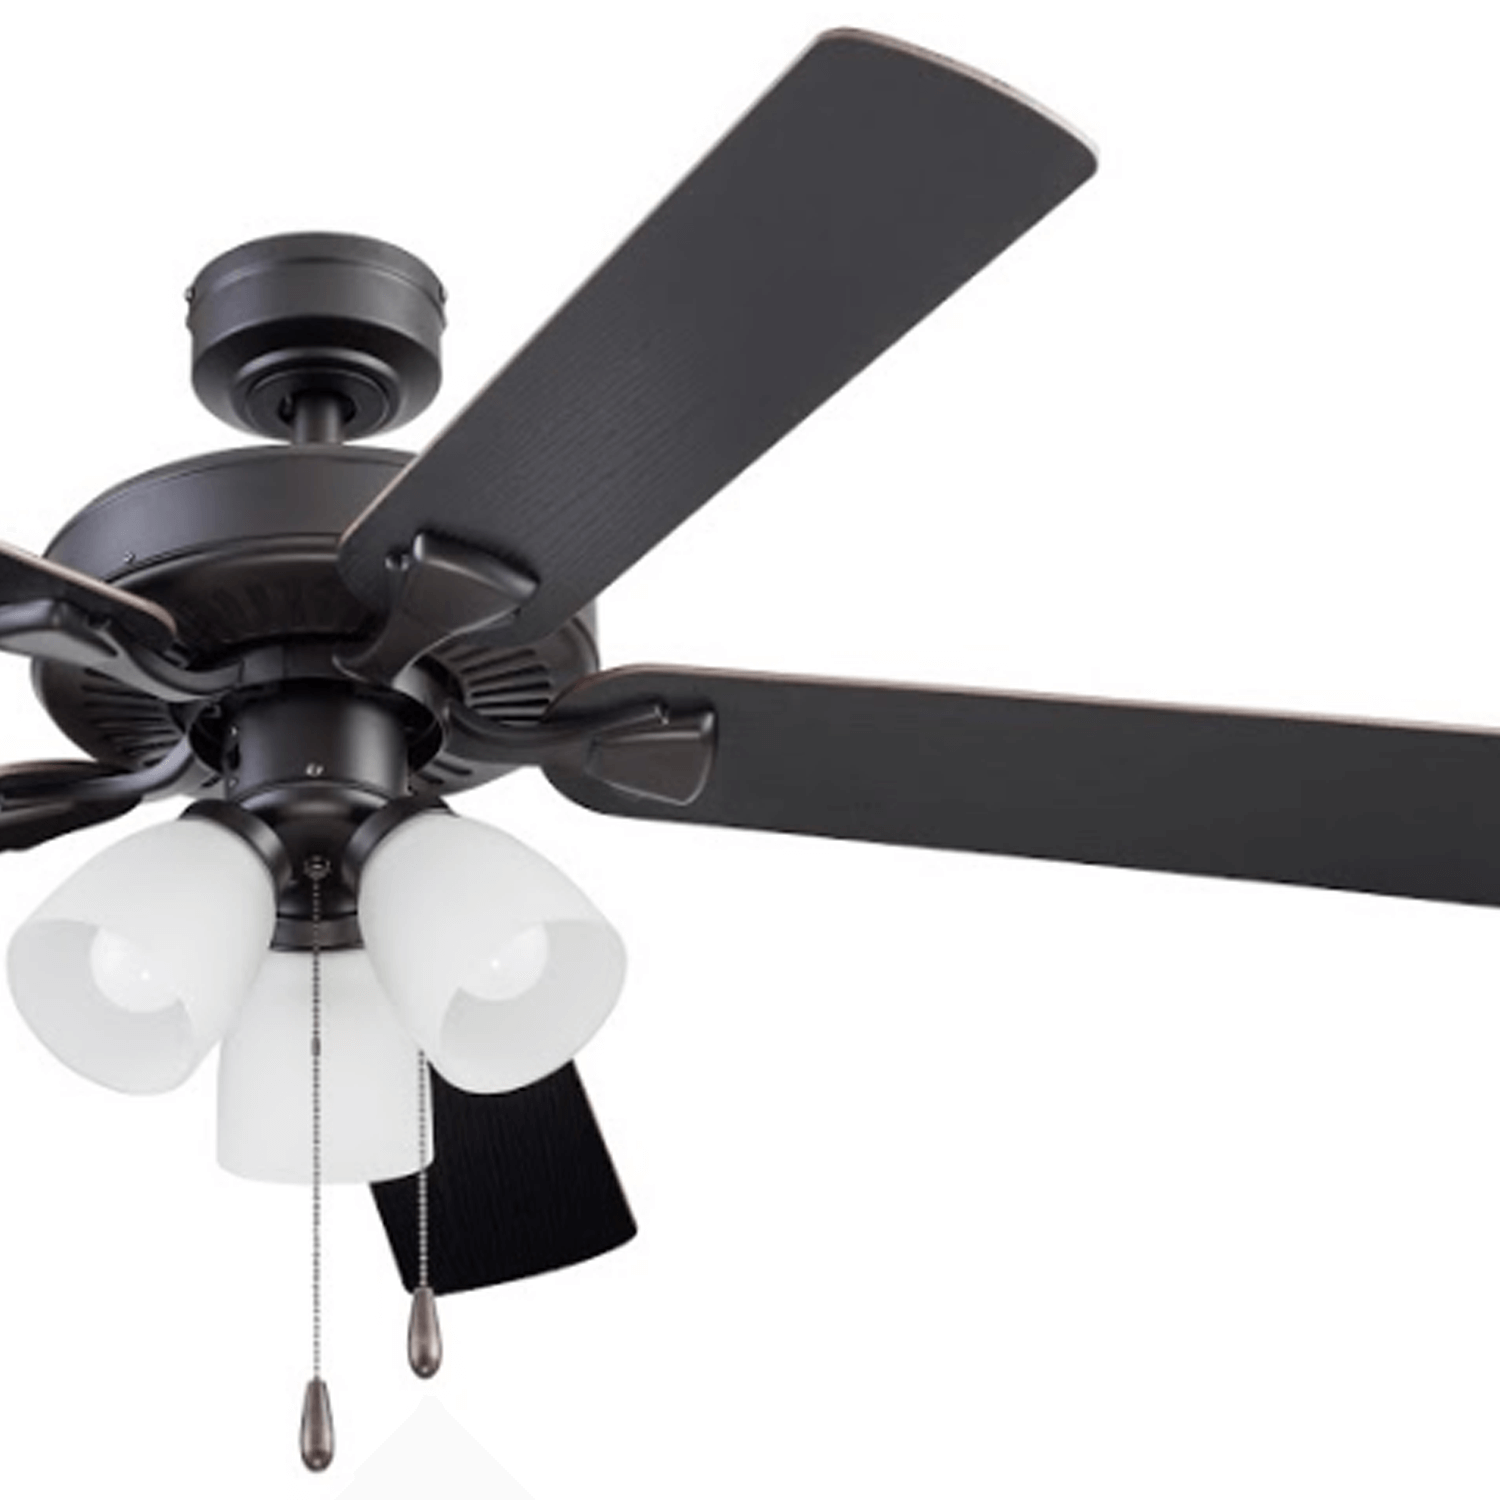 52 Inch Stannor, Espresso Bronze, Pull Chain, Ceiling Fan by Prominence Home